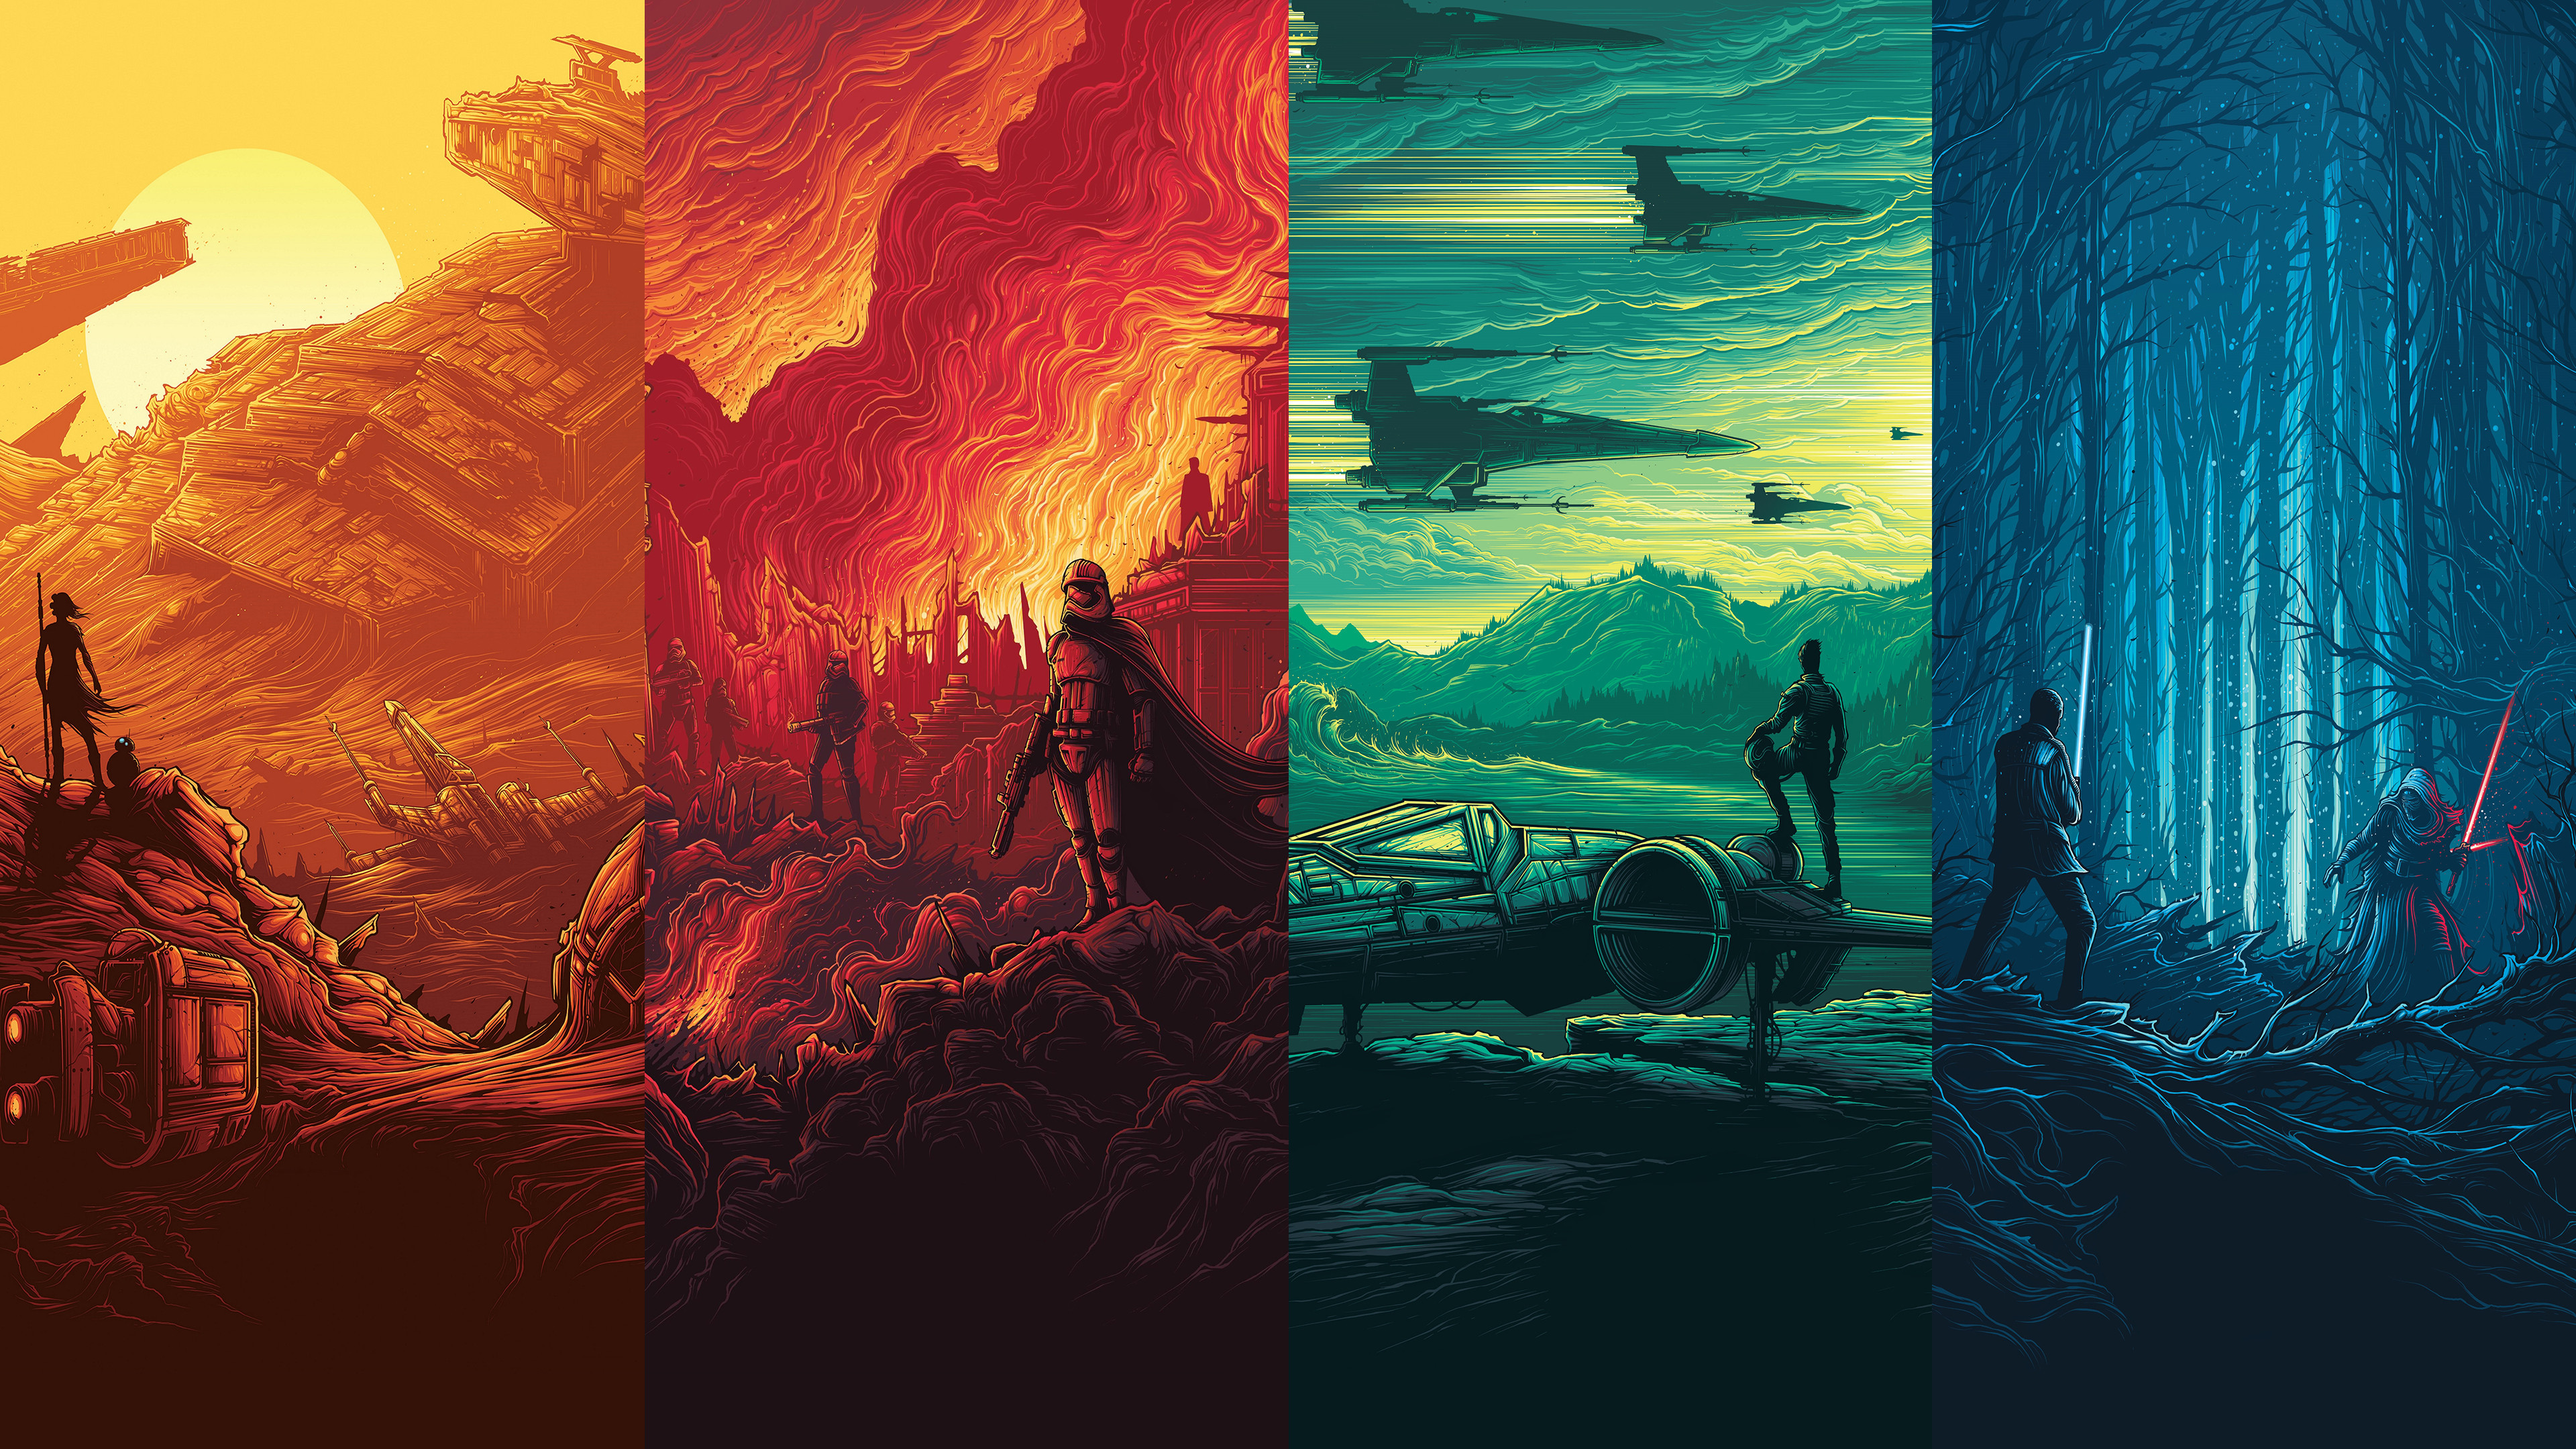 3840x2160 Wallpapers I made of those epic Imax Star Wars posters